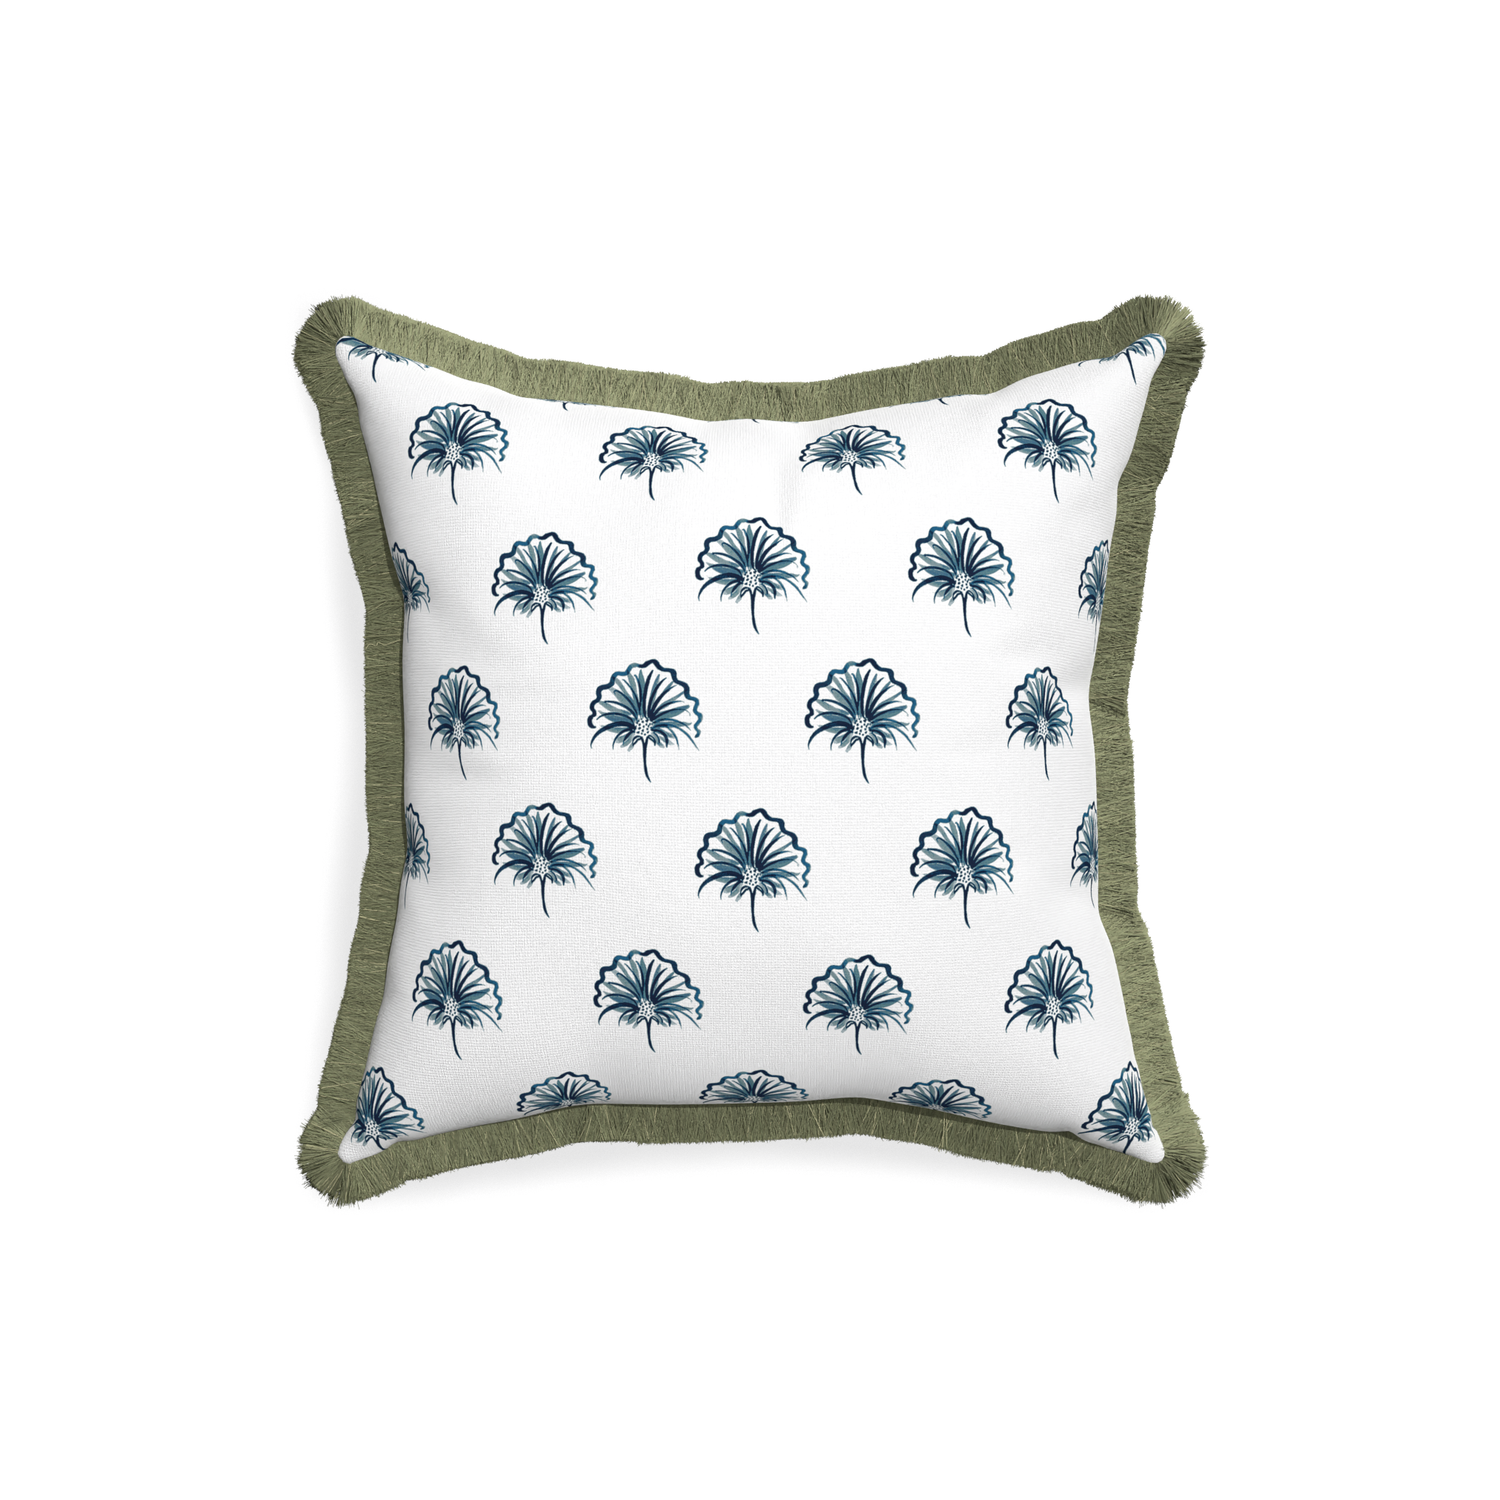 18-square penelope midnight custom floral navypillow with sage fringe on white background